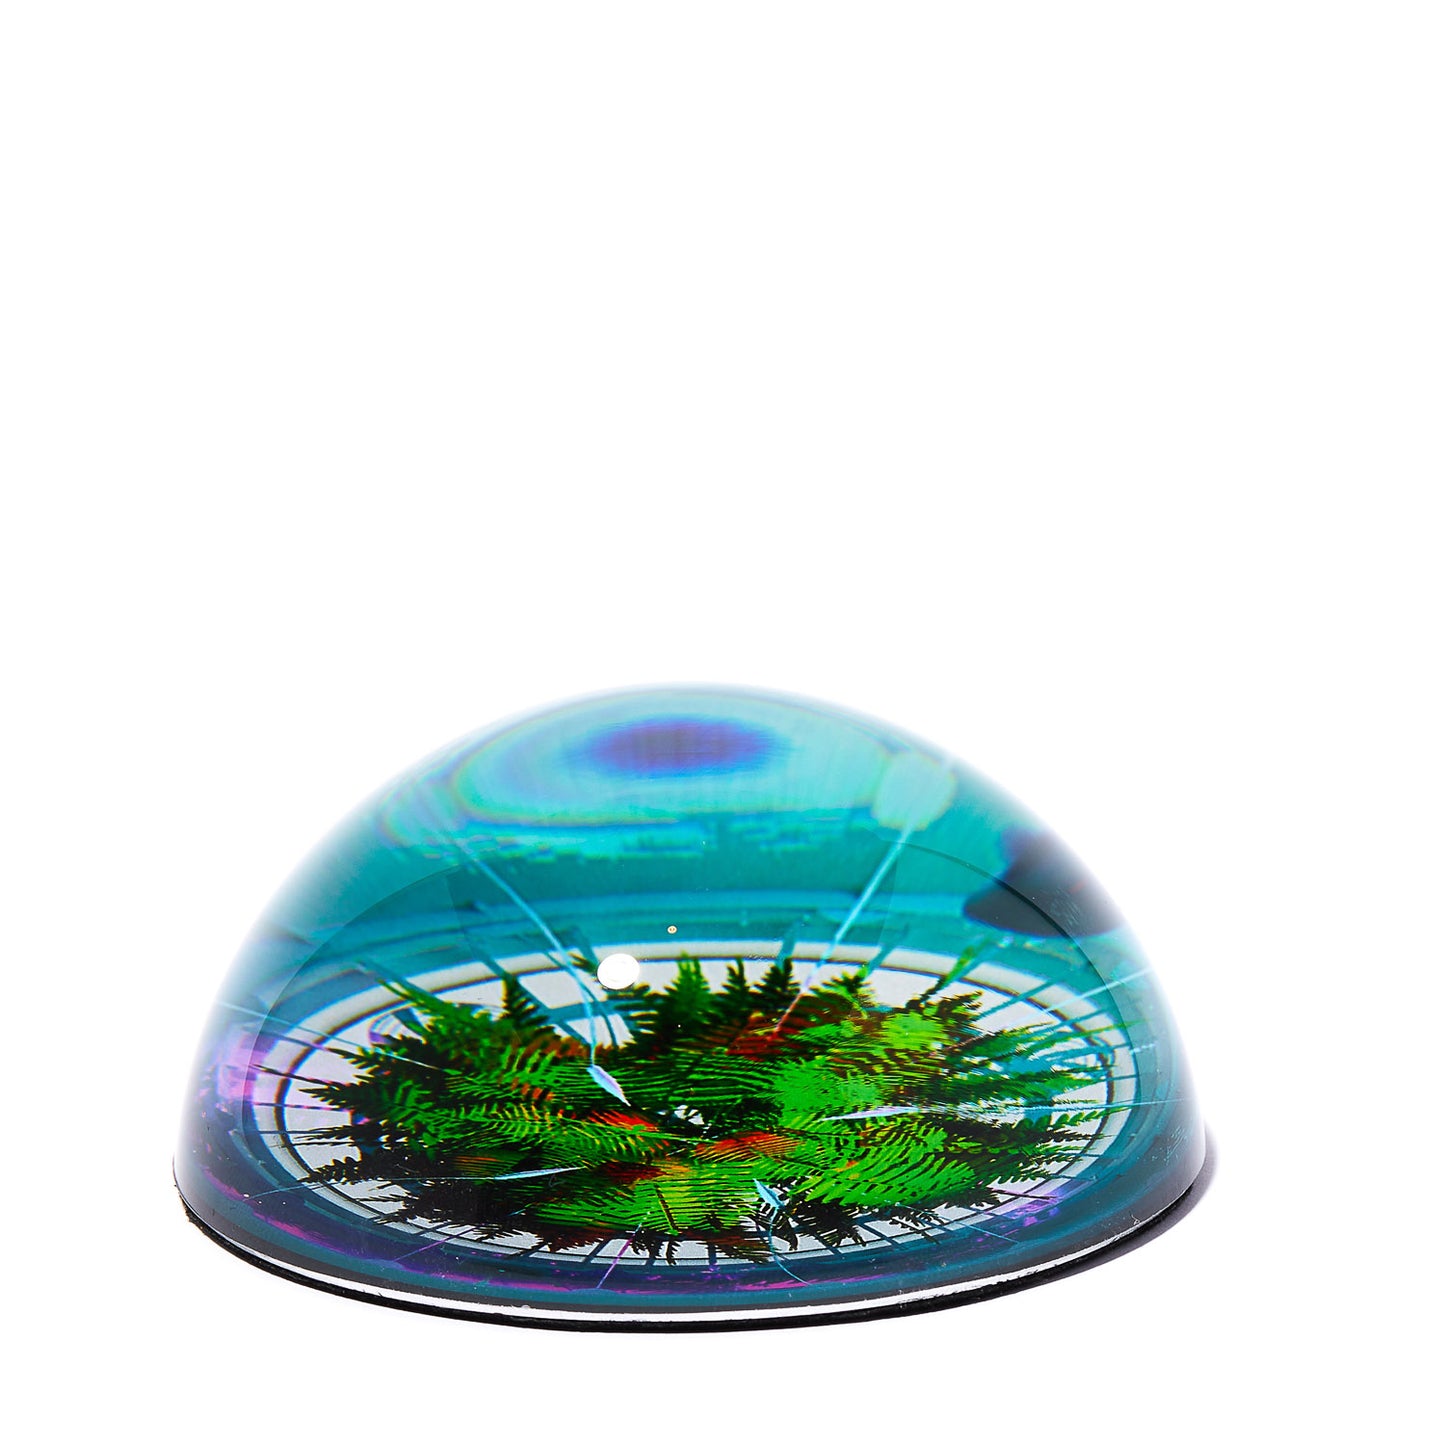 THE OBSERVATORY FERN PAPERWEIGHT